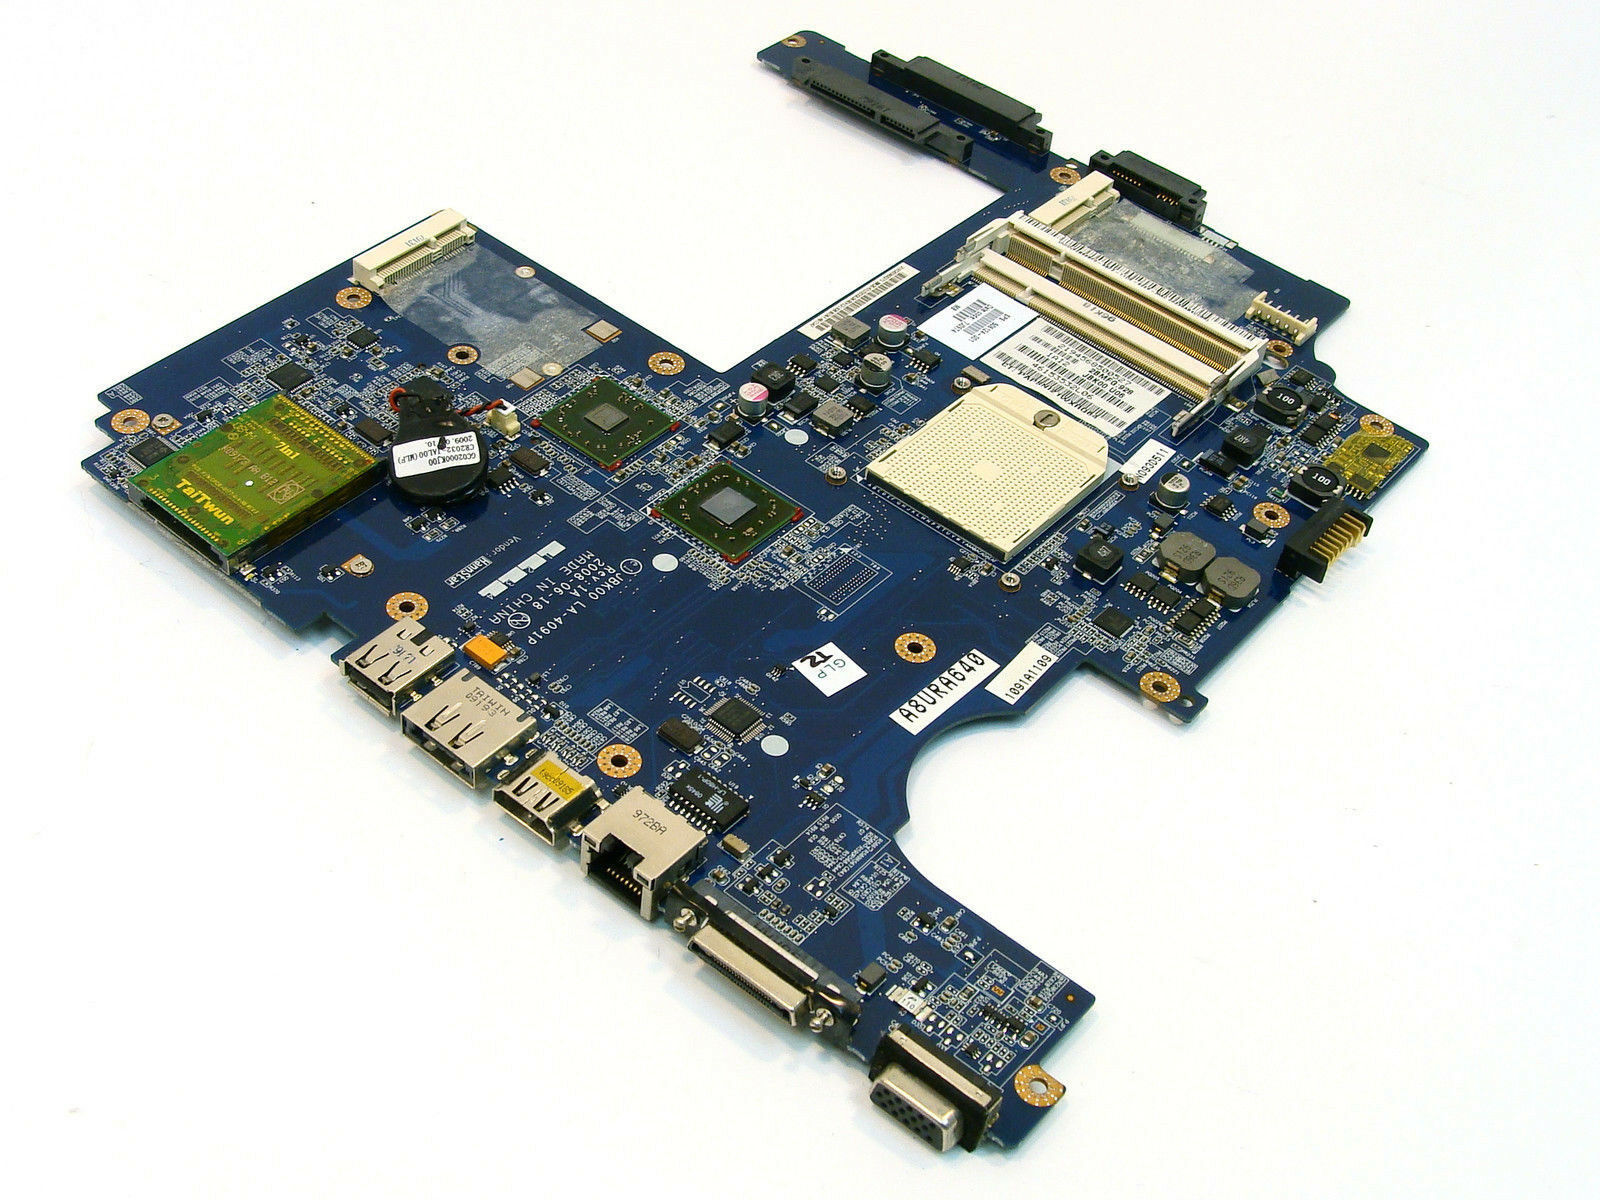 HP DV7- 1240US 1260US 1464NR 1267CL 506124-001 Motherboard HDMI Tested New BIOS Tracking Number is INCLUDED,